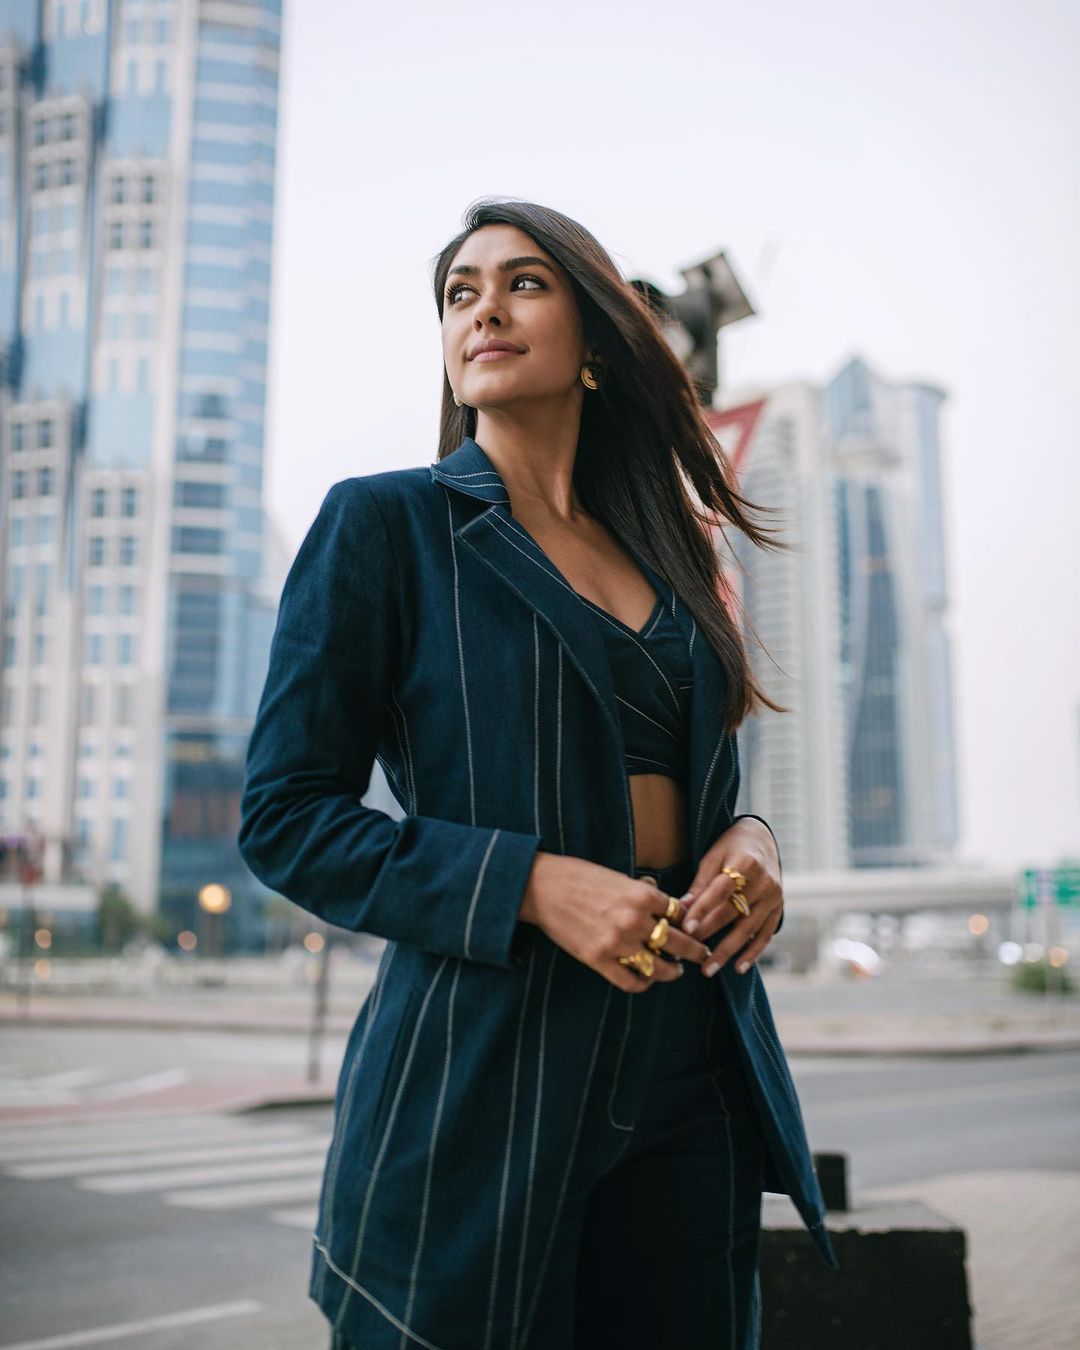 Watch this stylish pictures of actress mrunal thakur-Actressmrunal, Mrunal Thakur, Mrunalthakur Photos,Spicy Hot Pics,Images,High Resolution WallPapers Download